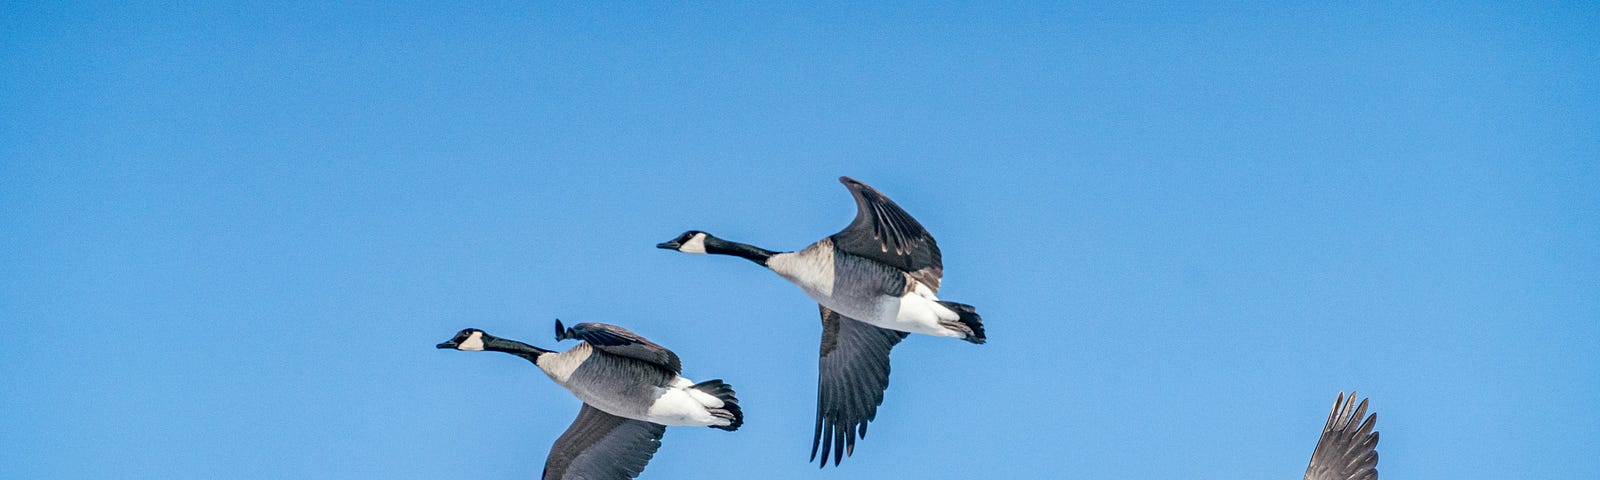 Five geese flying in formation.